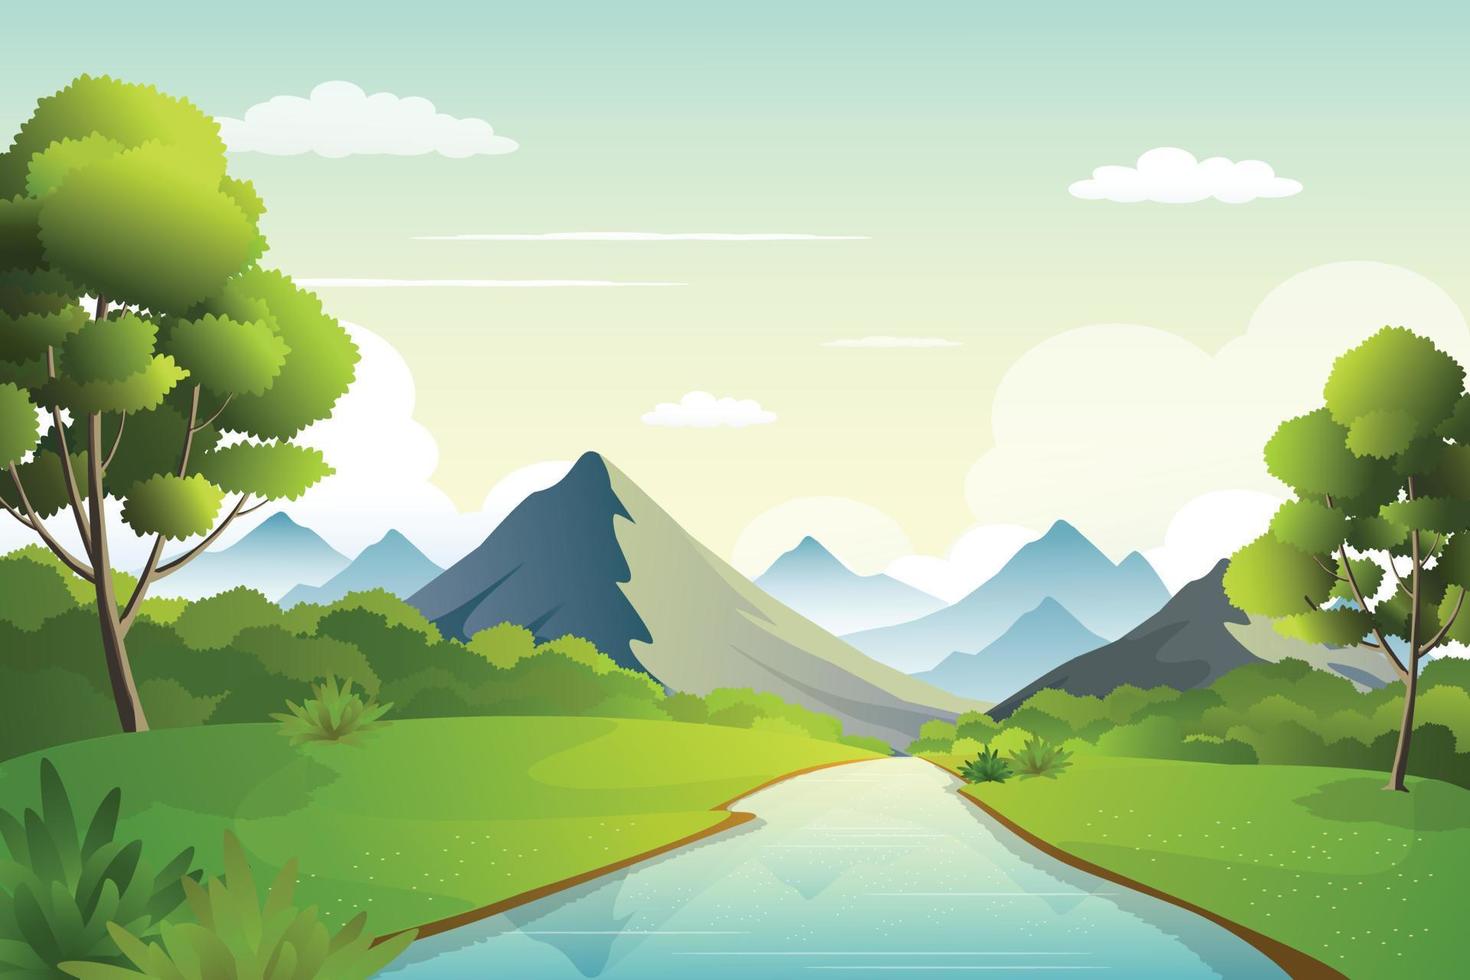 Nature Landscape of Riverside with Mountain Range on Horizon, Trees, Bushes and River Scenery Vector Illustration